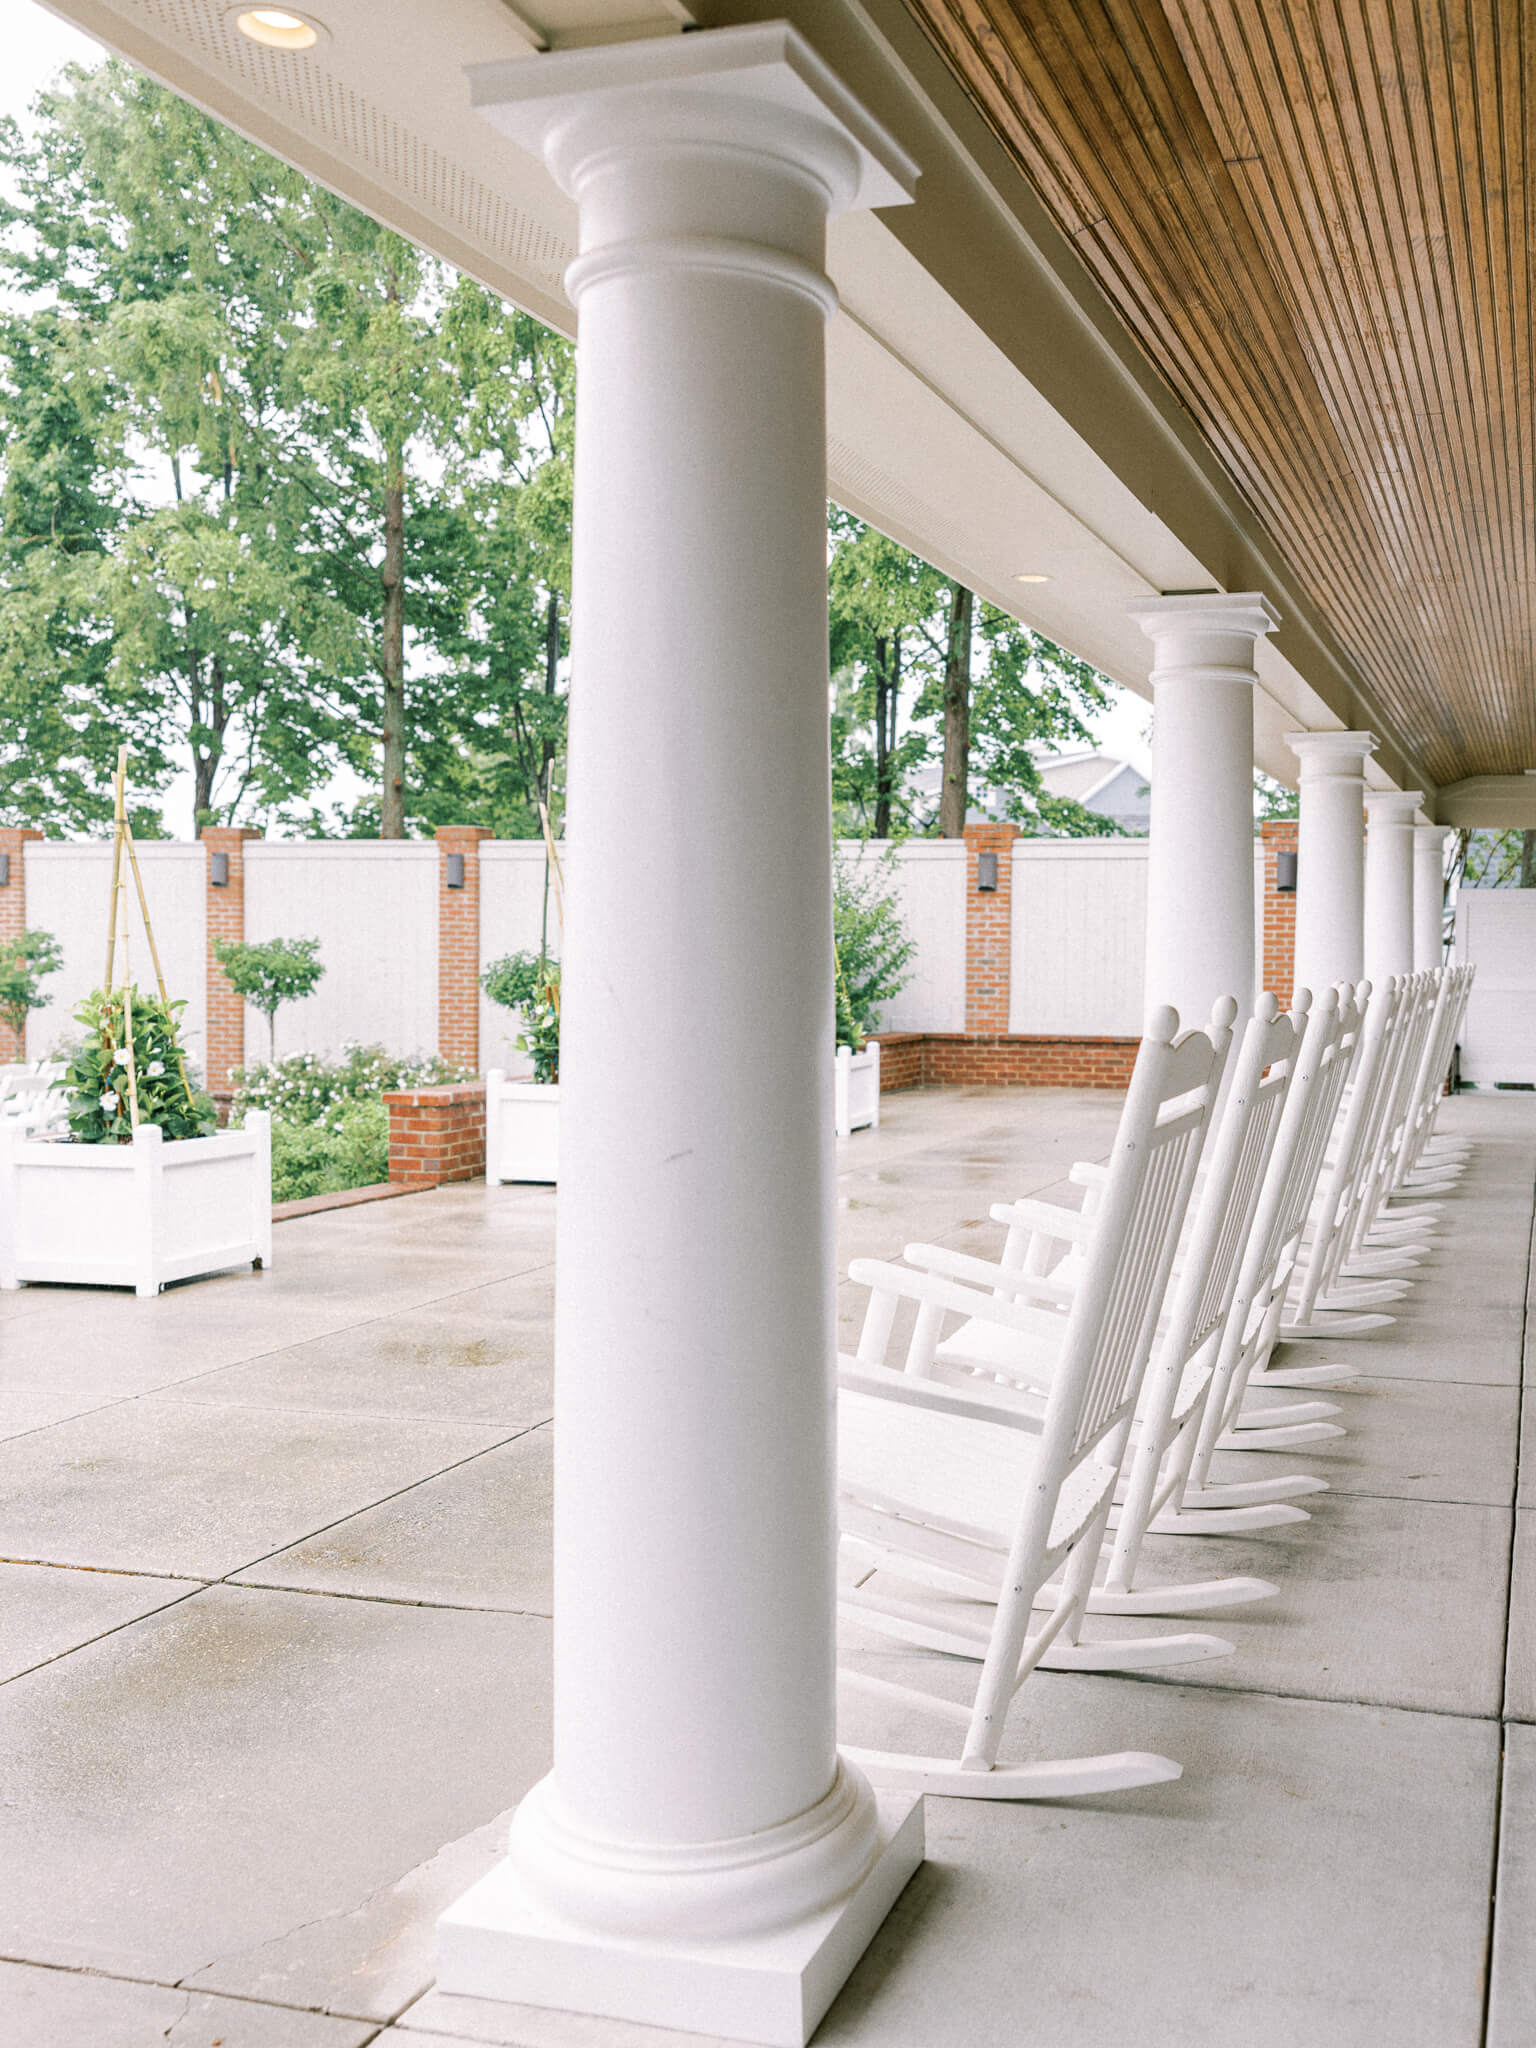 White rocking chairs under the covered back porch of Chesapeake Bay Beach club overlooking the outdoor ceremony space